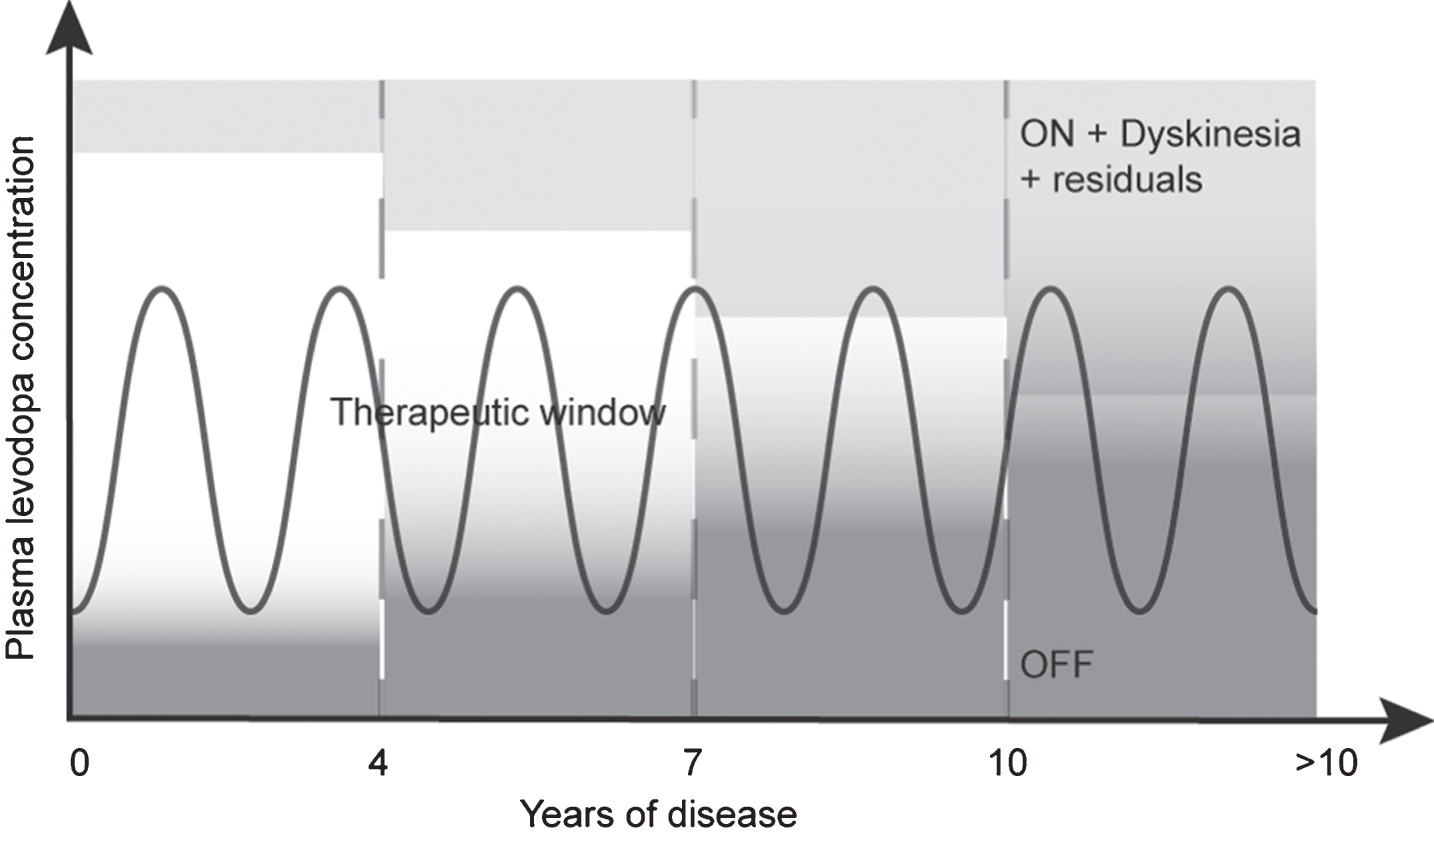 Proposed pattern of motor response to levodopa over the time. This pattern suggests that some residual cardinal motor features of PD (i.e., bradykinesia, rigidity, postural instability and tremors) remain present in the therapeutic window, and could even overlap with dyskinesia.